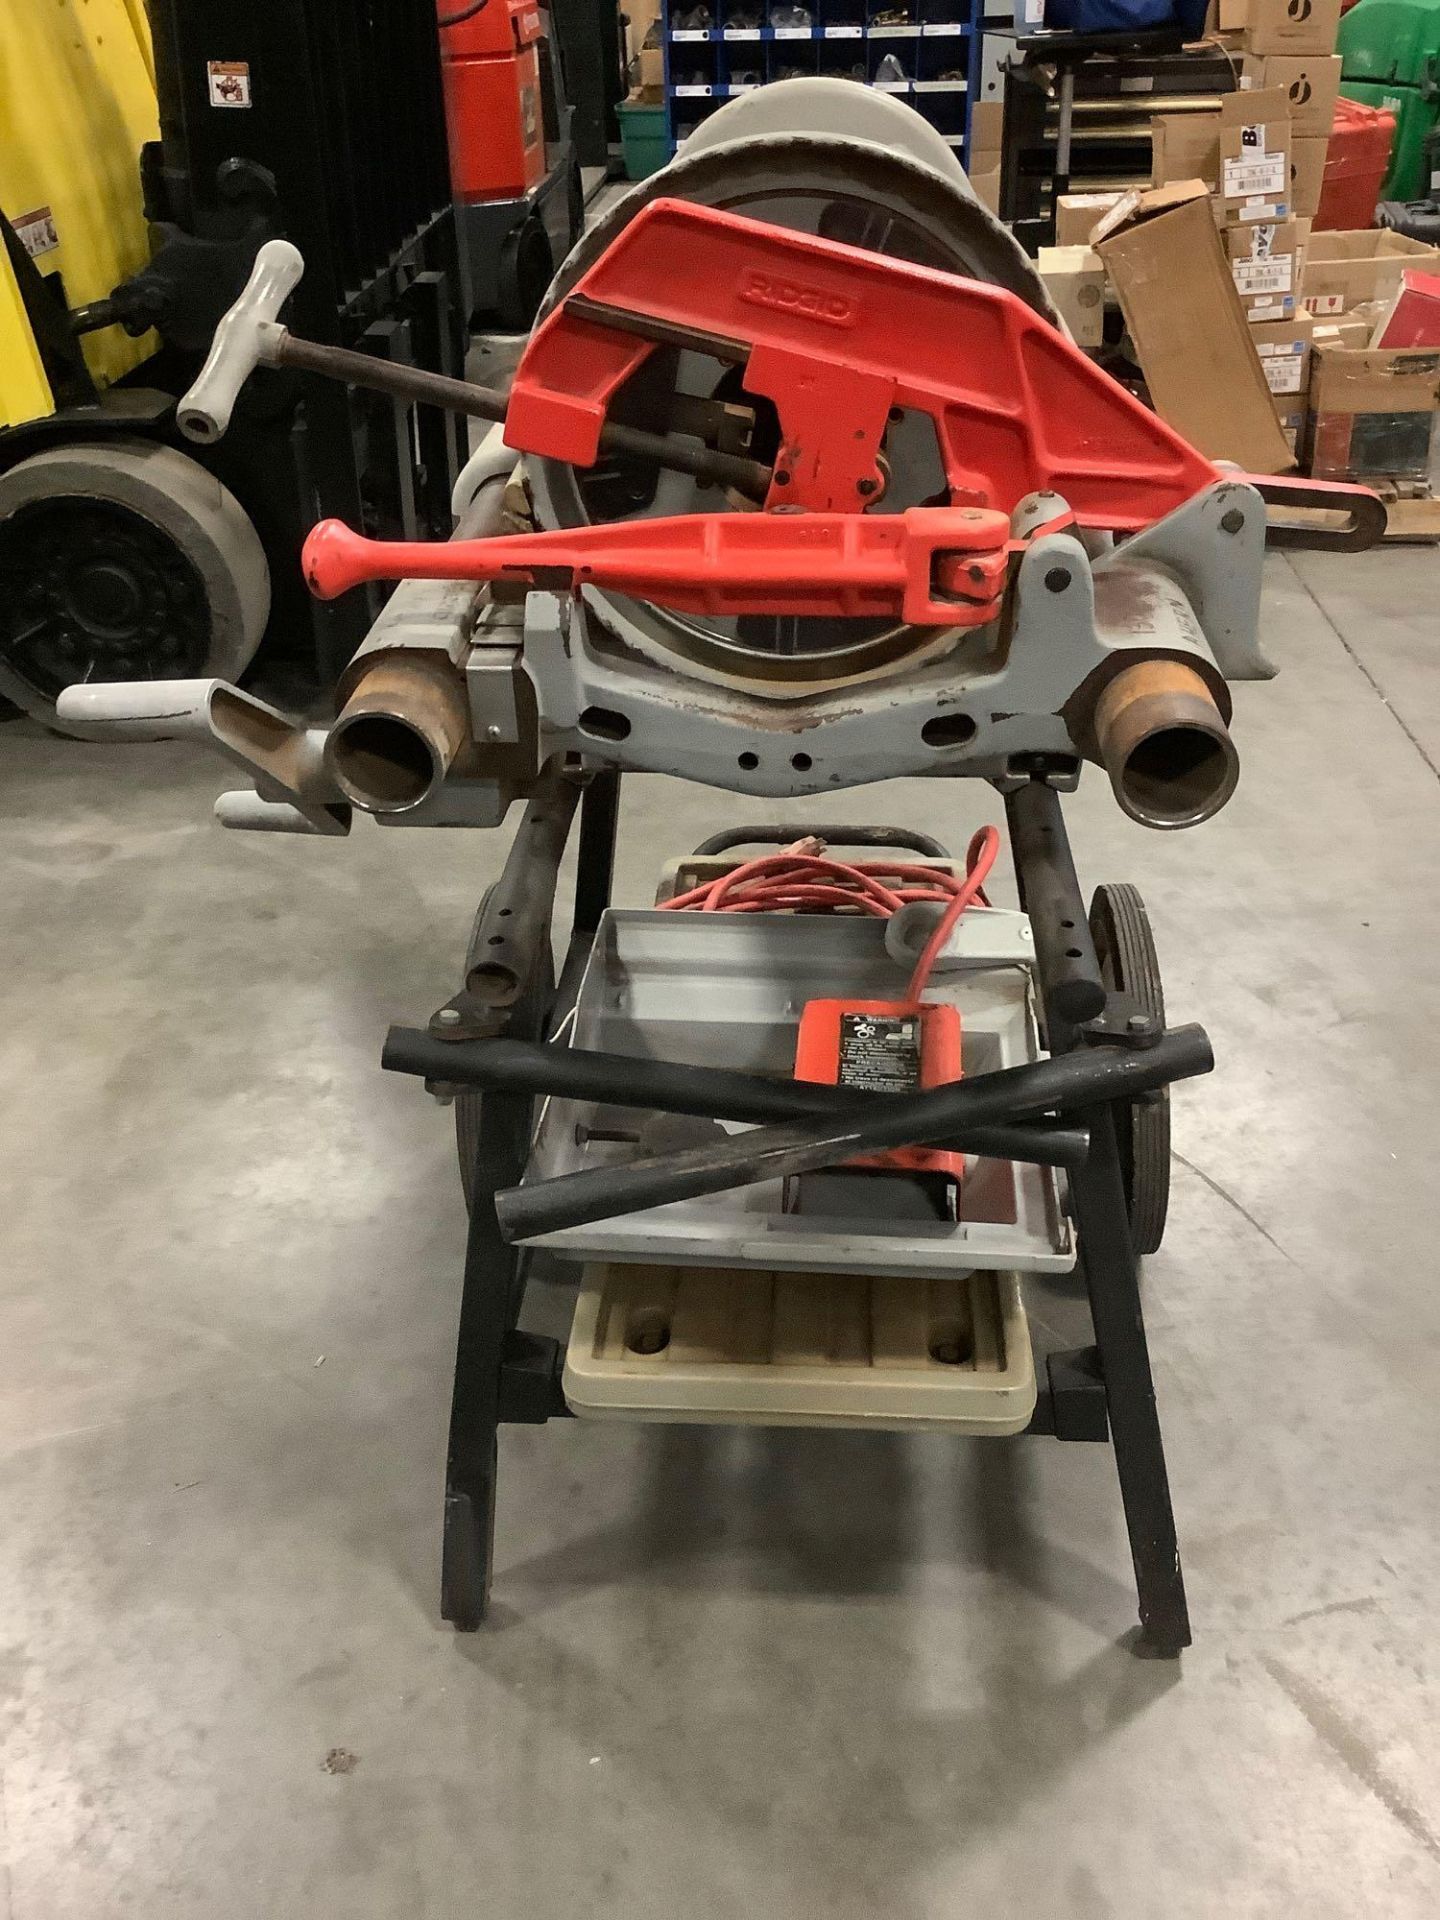 2013 ELECTRIC RIDGID PIPE THREADER MODEL 1224 WITH STAND, APPROX 120 VOLTS,APPROX AMP 15,APPROX HZ 6 - Image 8 of 10